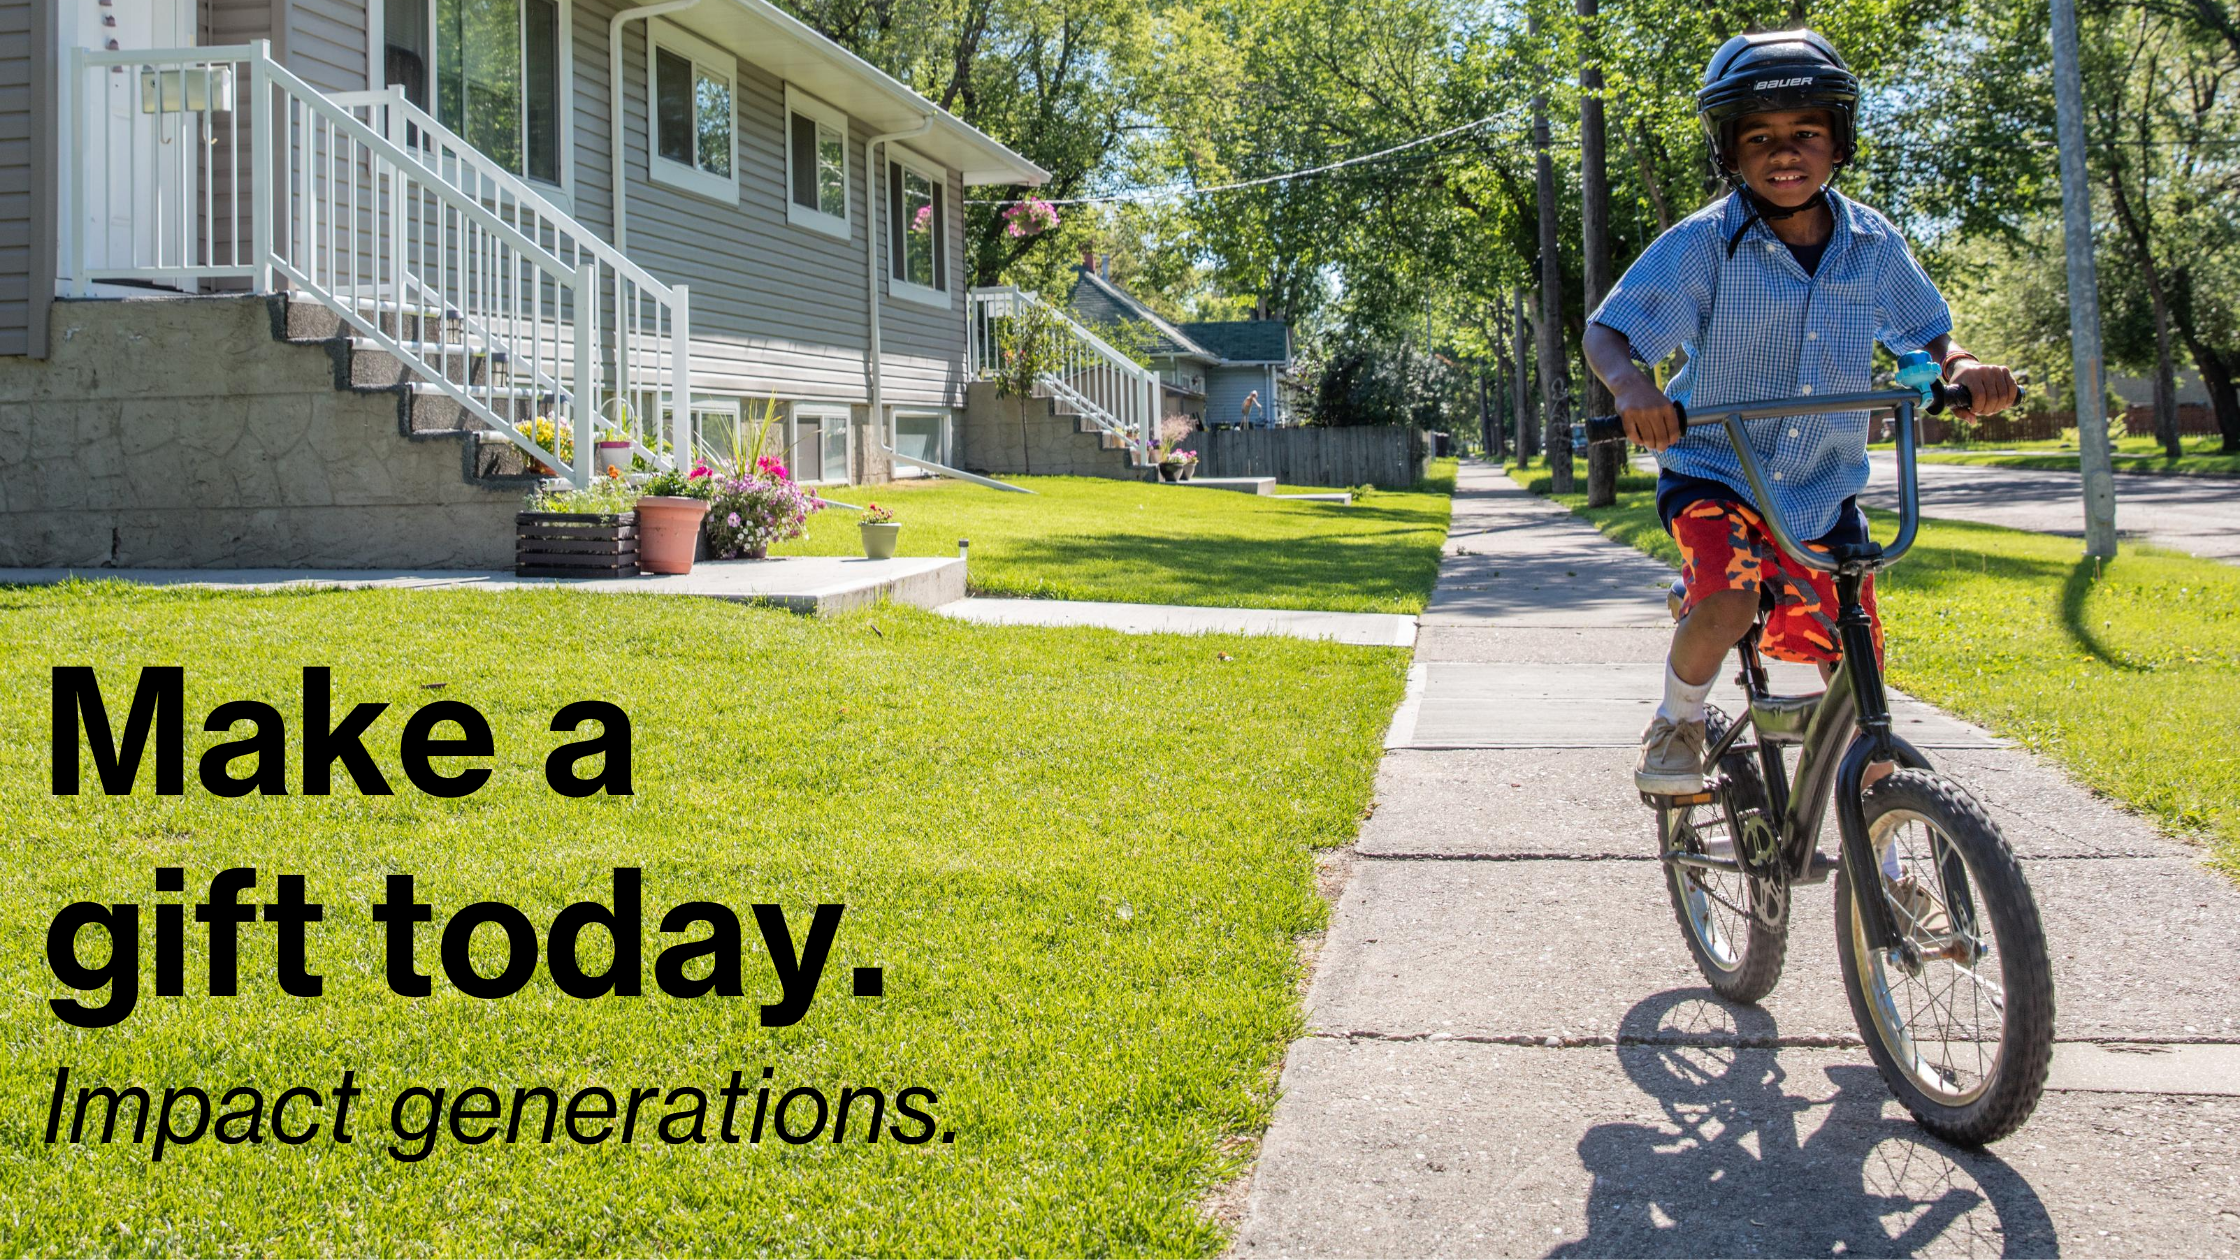 Make a Gift Today. Impact Generations – Boy on Bicycle